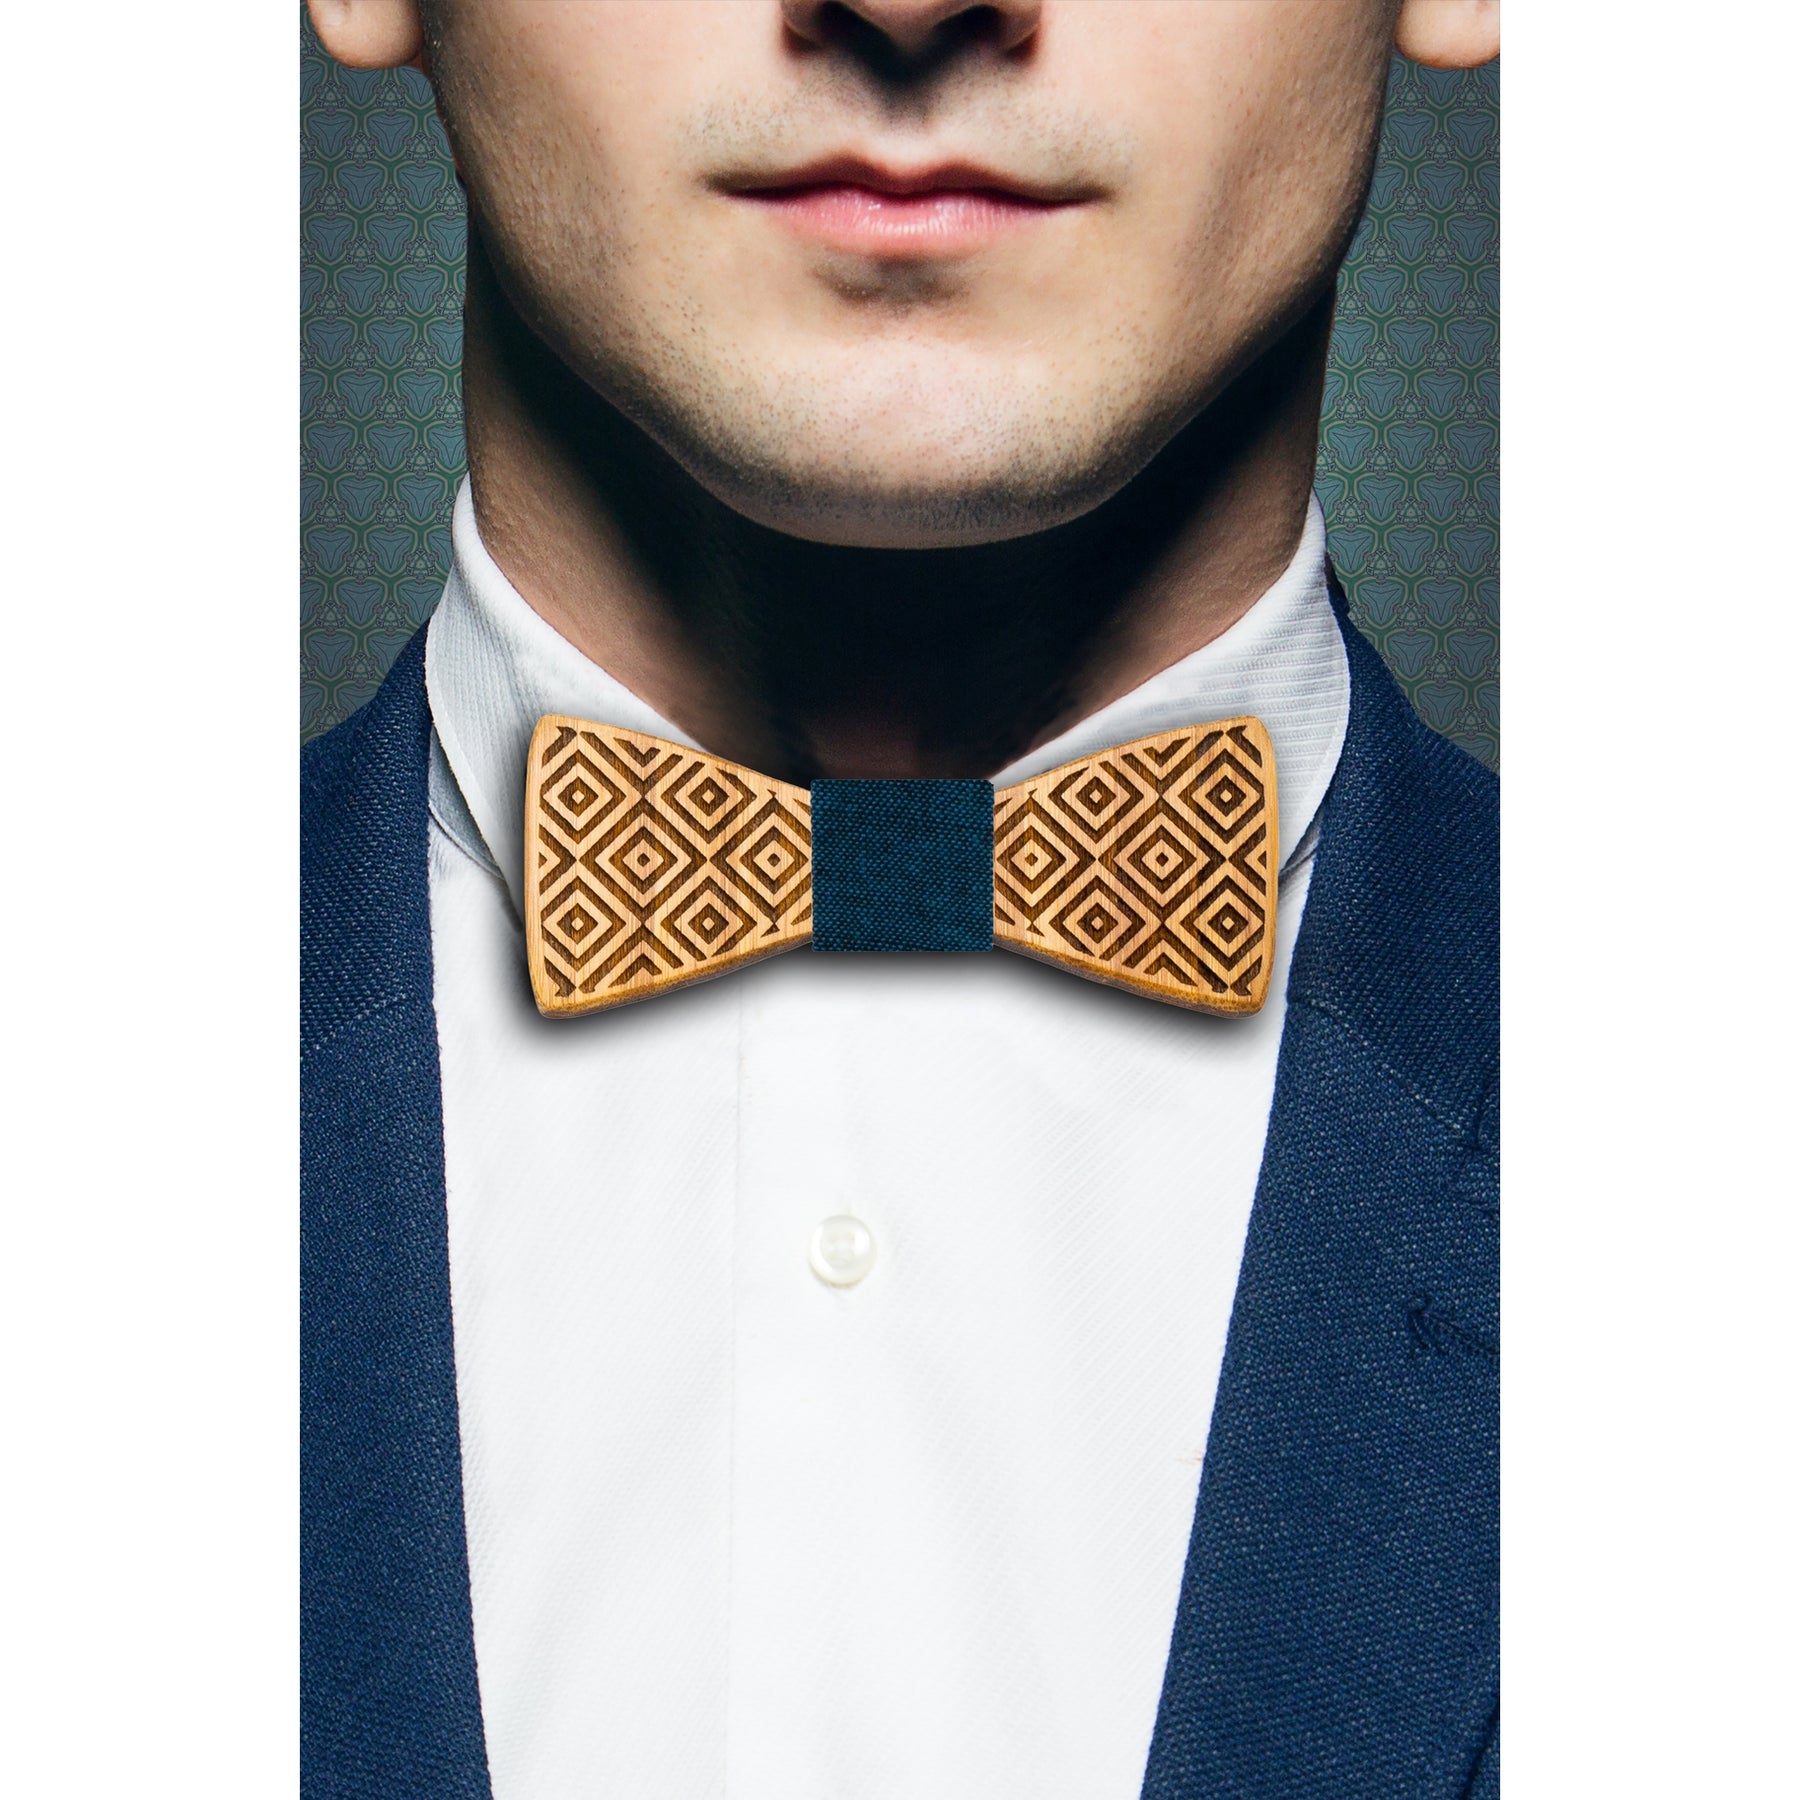 SQUARE FLAIR BOW TIE | Handmade Bamboo Bow Tie - Wedding Gift - Groomsmen Gift - Fathers Day - Minter and Richter Designs